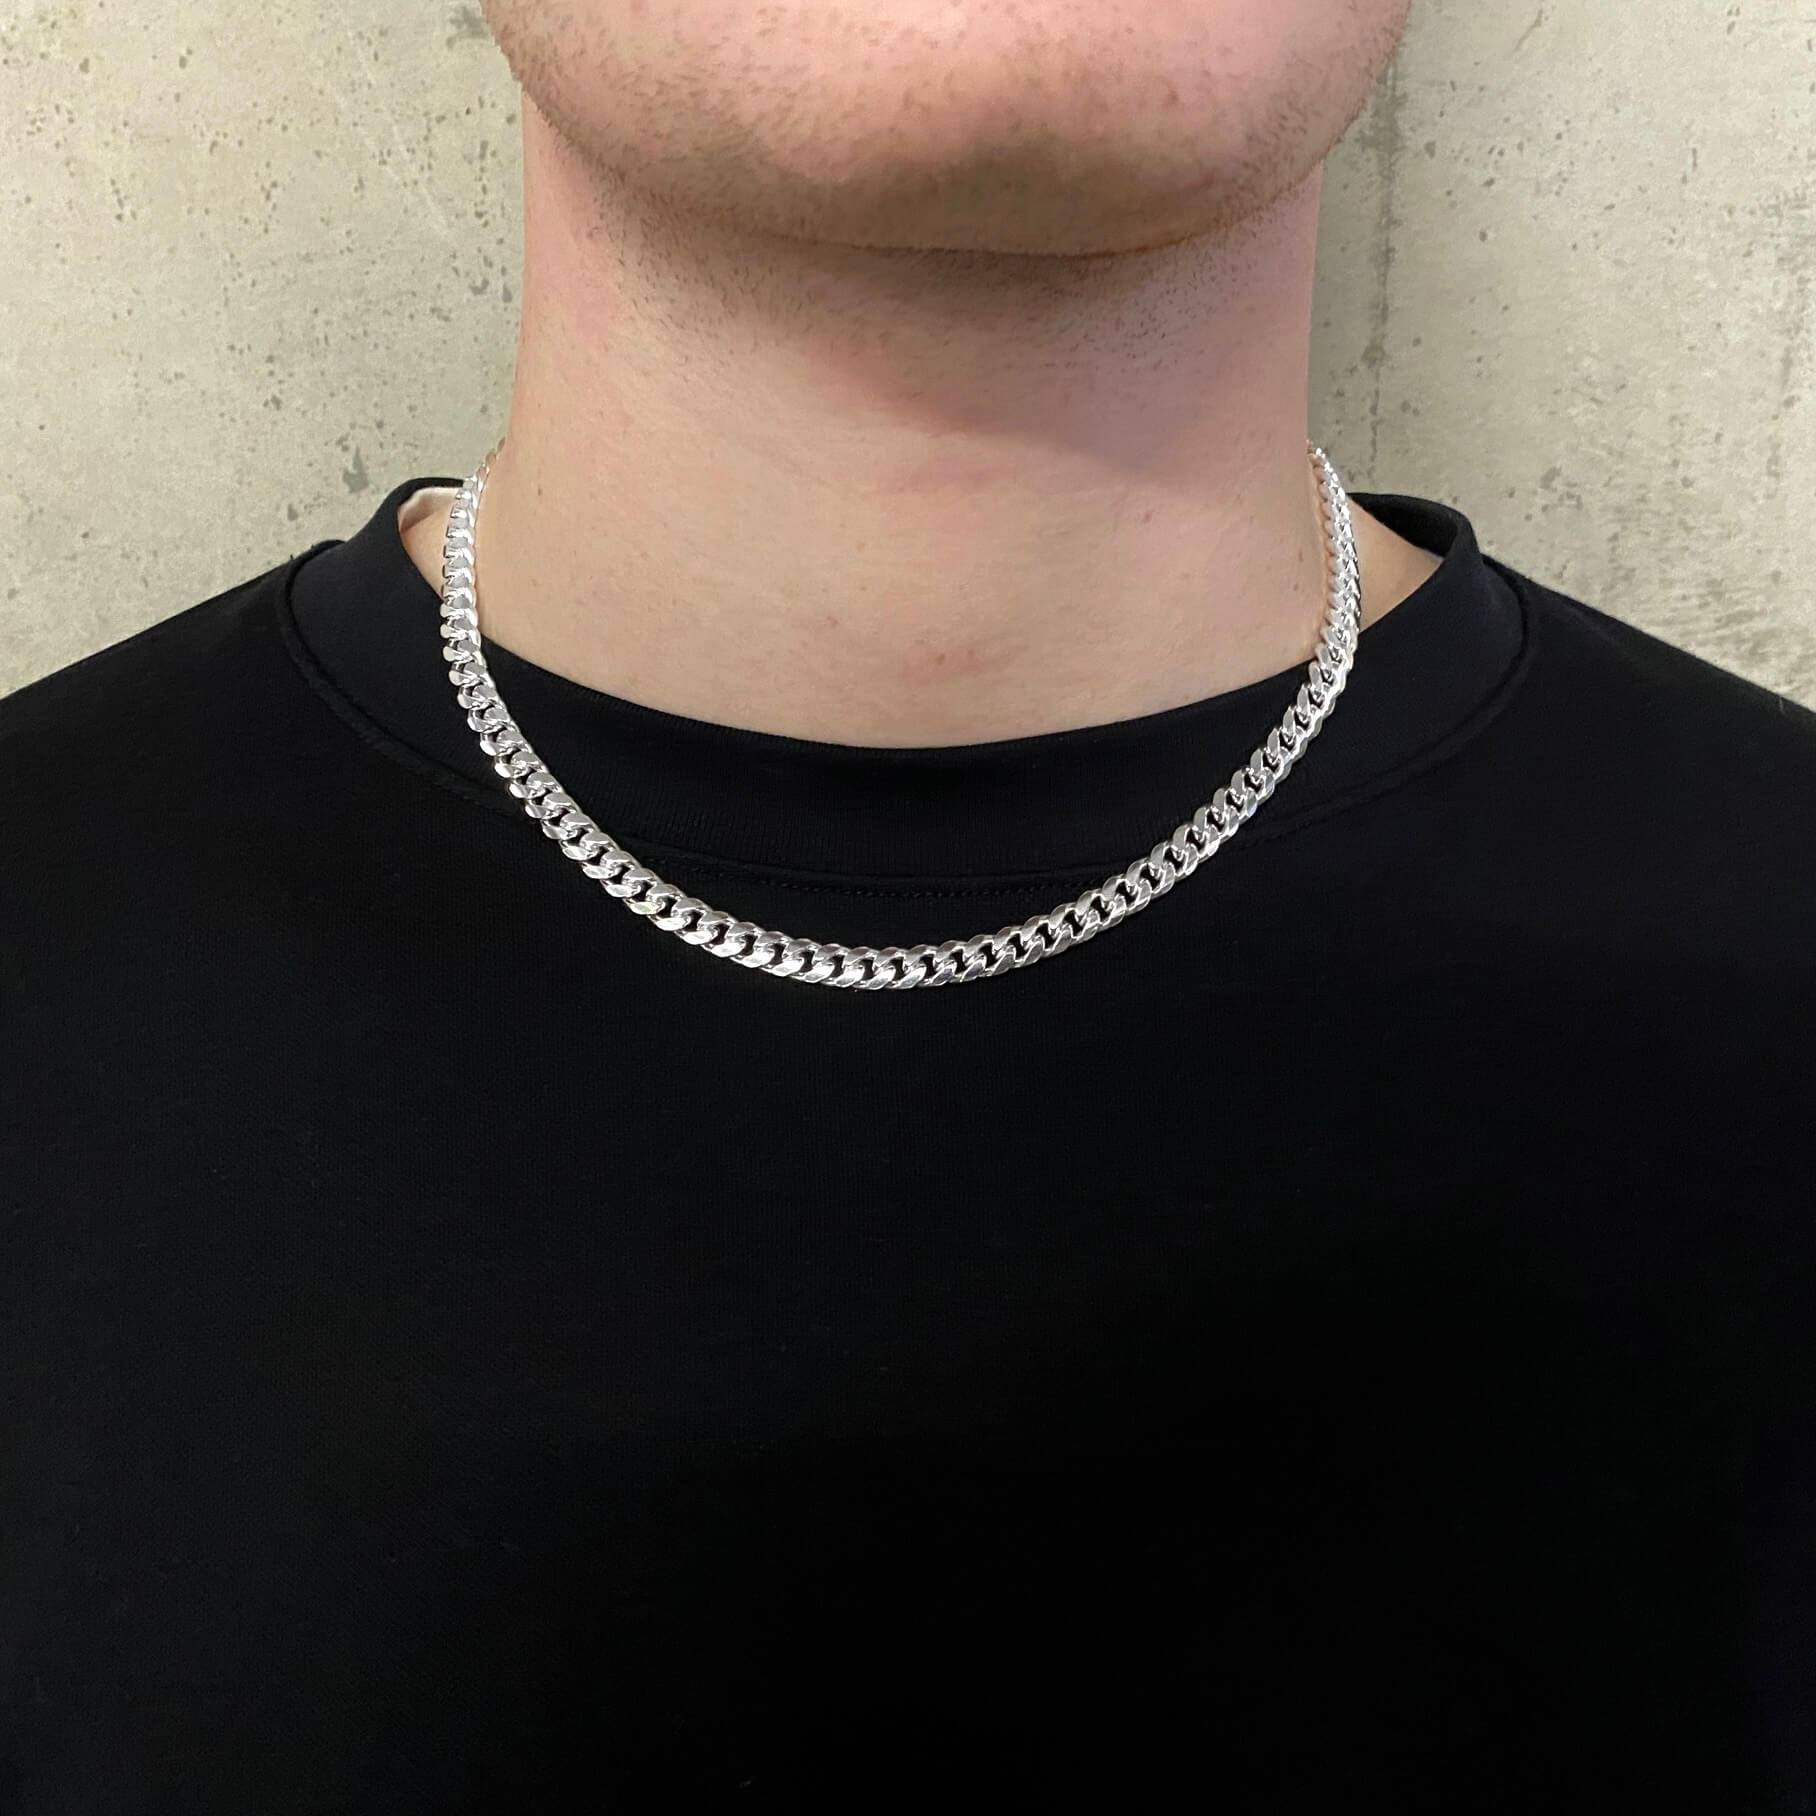 Men's Curb Chain in Sterling Silver - 6mm